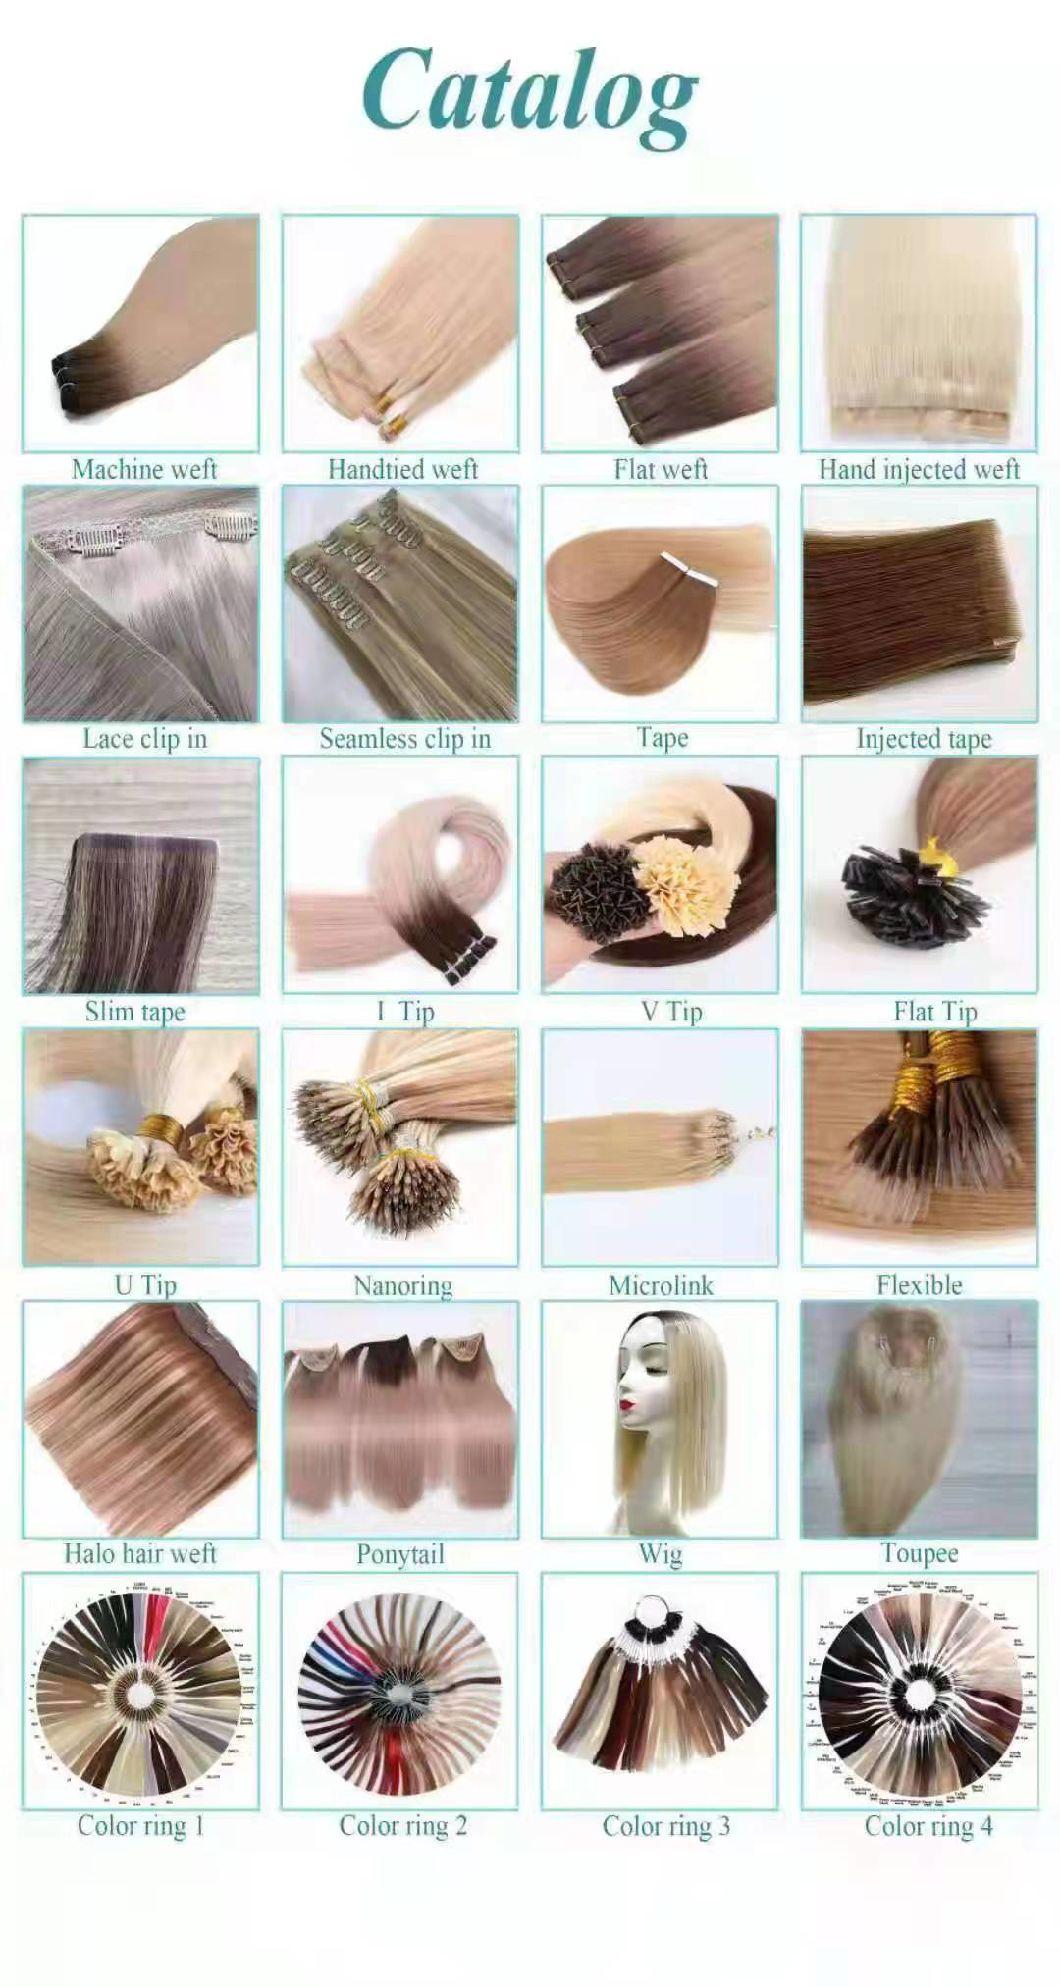 China Factory 100% Remy 100g PU Clip in Hair Human Hair Extensions.